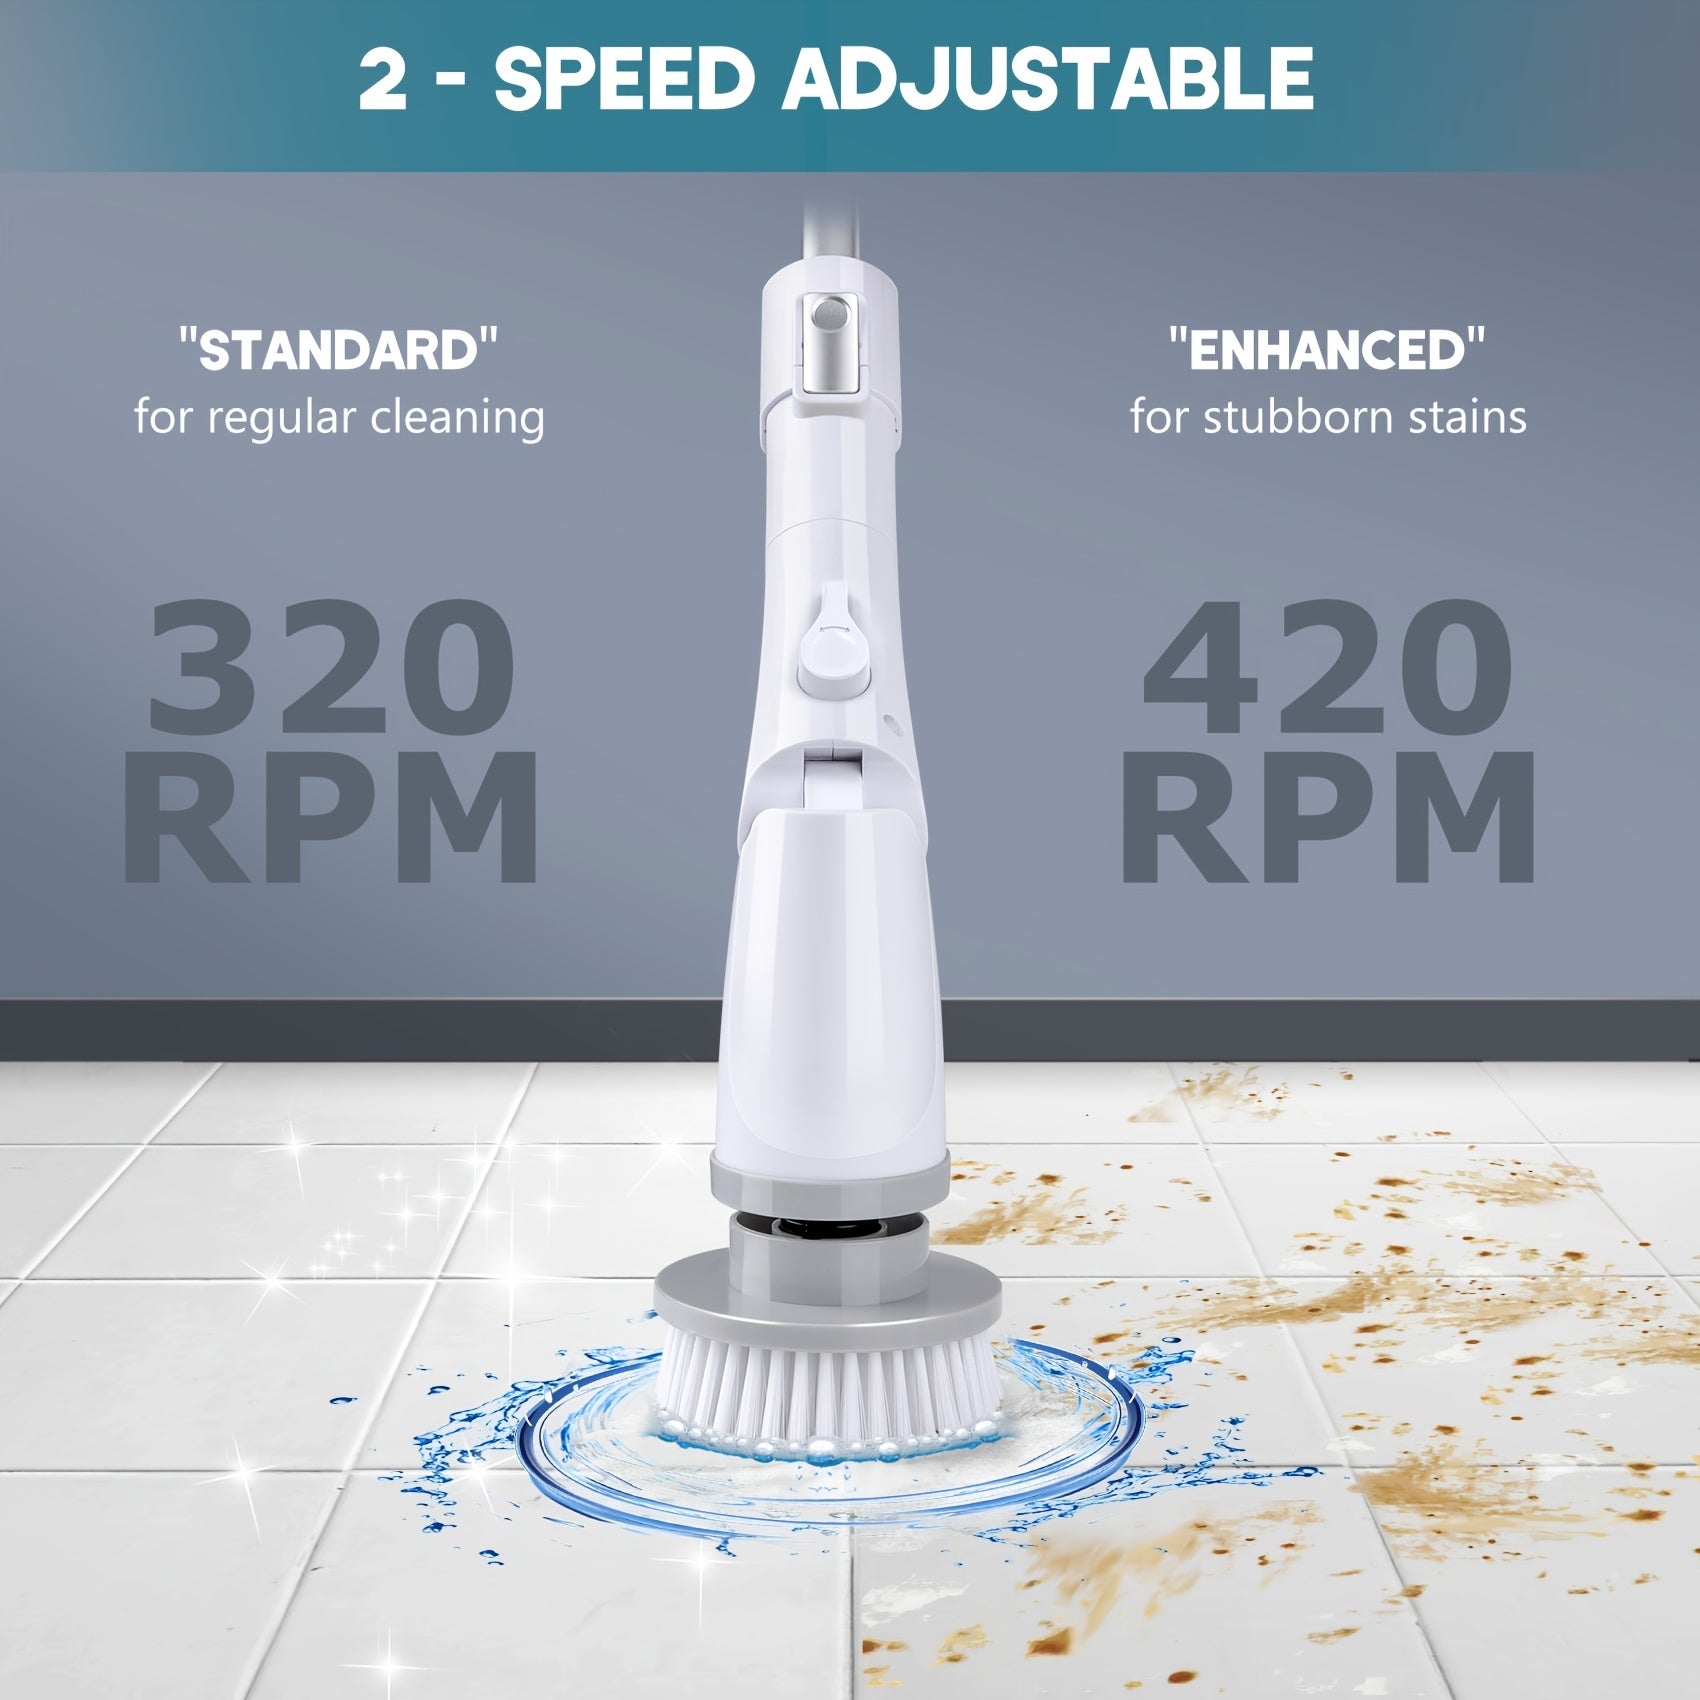 VENETIO 1 set Cordless Electric Spin Scrubber with 4 Replaceable Brush Heads - Long Handled Shower Scrubber for Tub Tile Cleaning - 90 Min Run Time - 320/420RPM - USB-C Charging Cord - Powerful Bathroom Cleaning Tool ➡ CS-00022